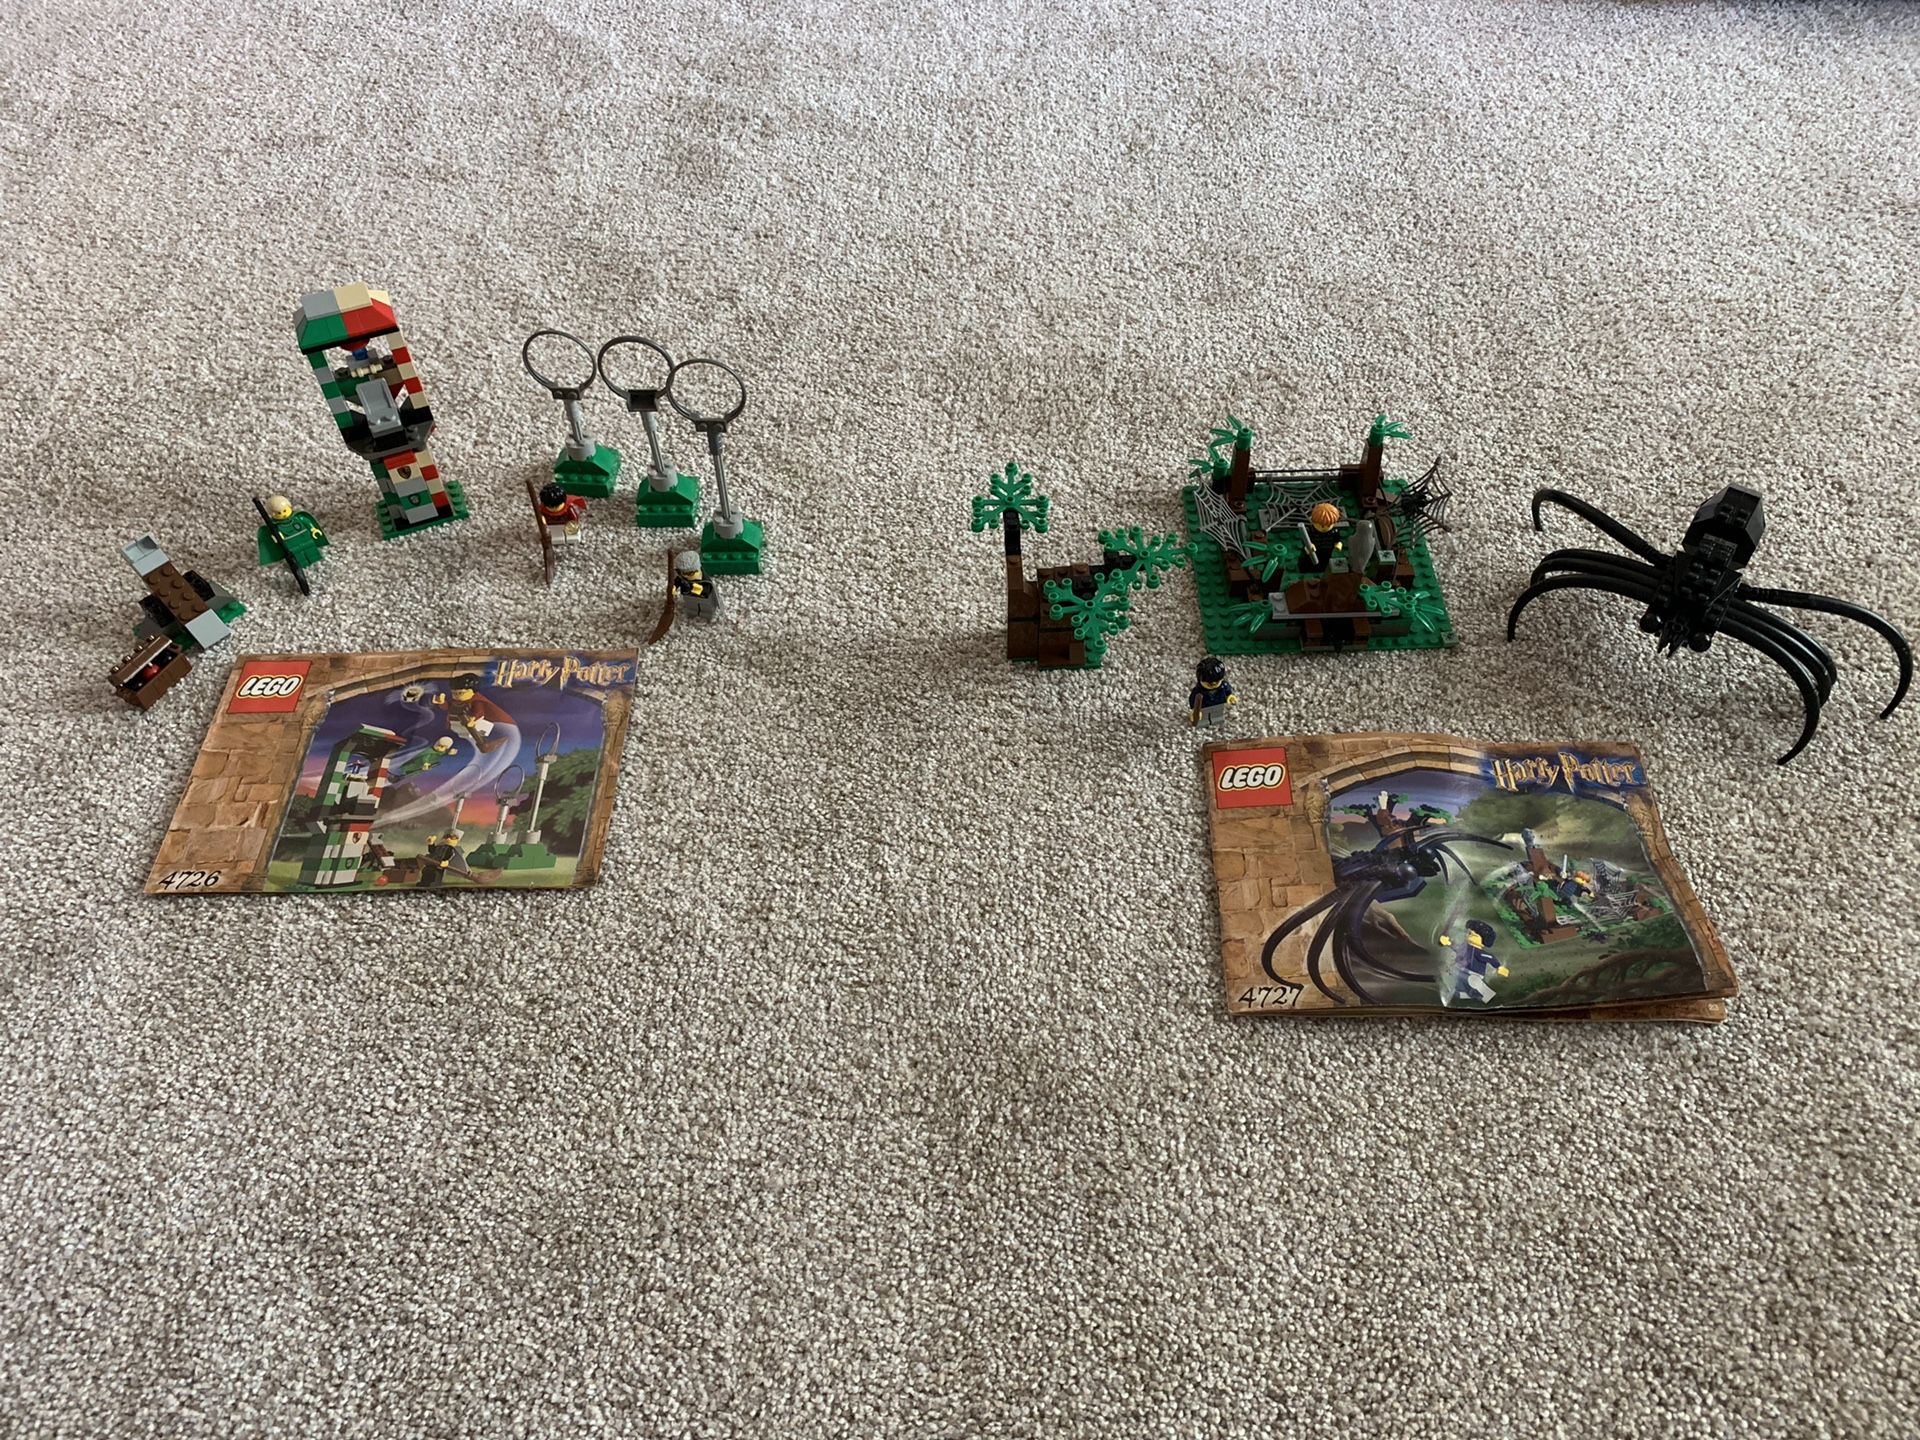 Harry Potter LEGO from 2002 (sets 4726 and 4727)